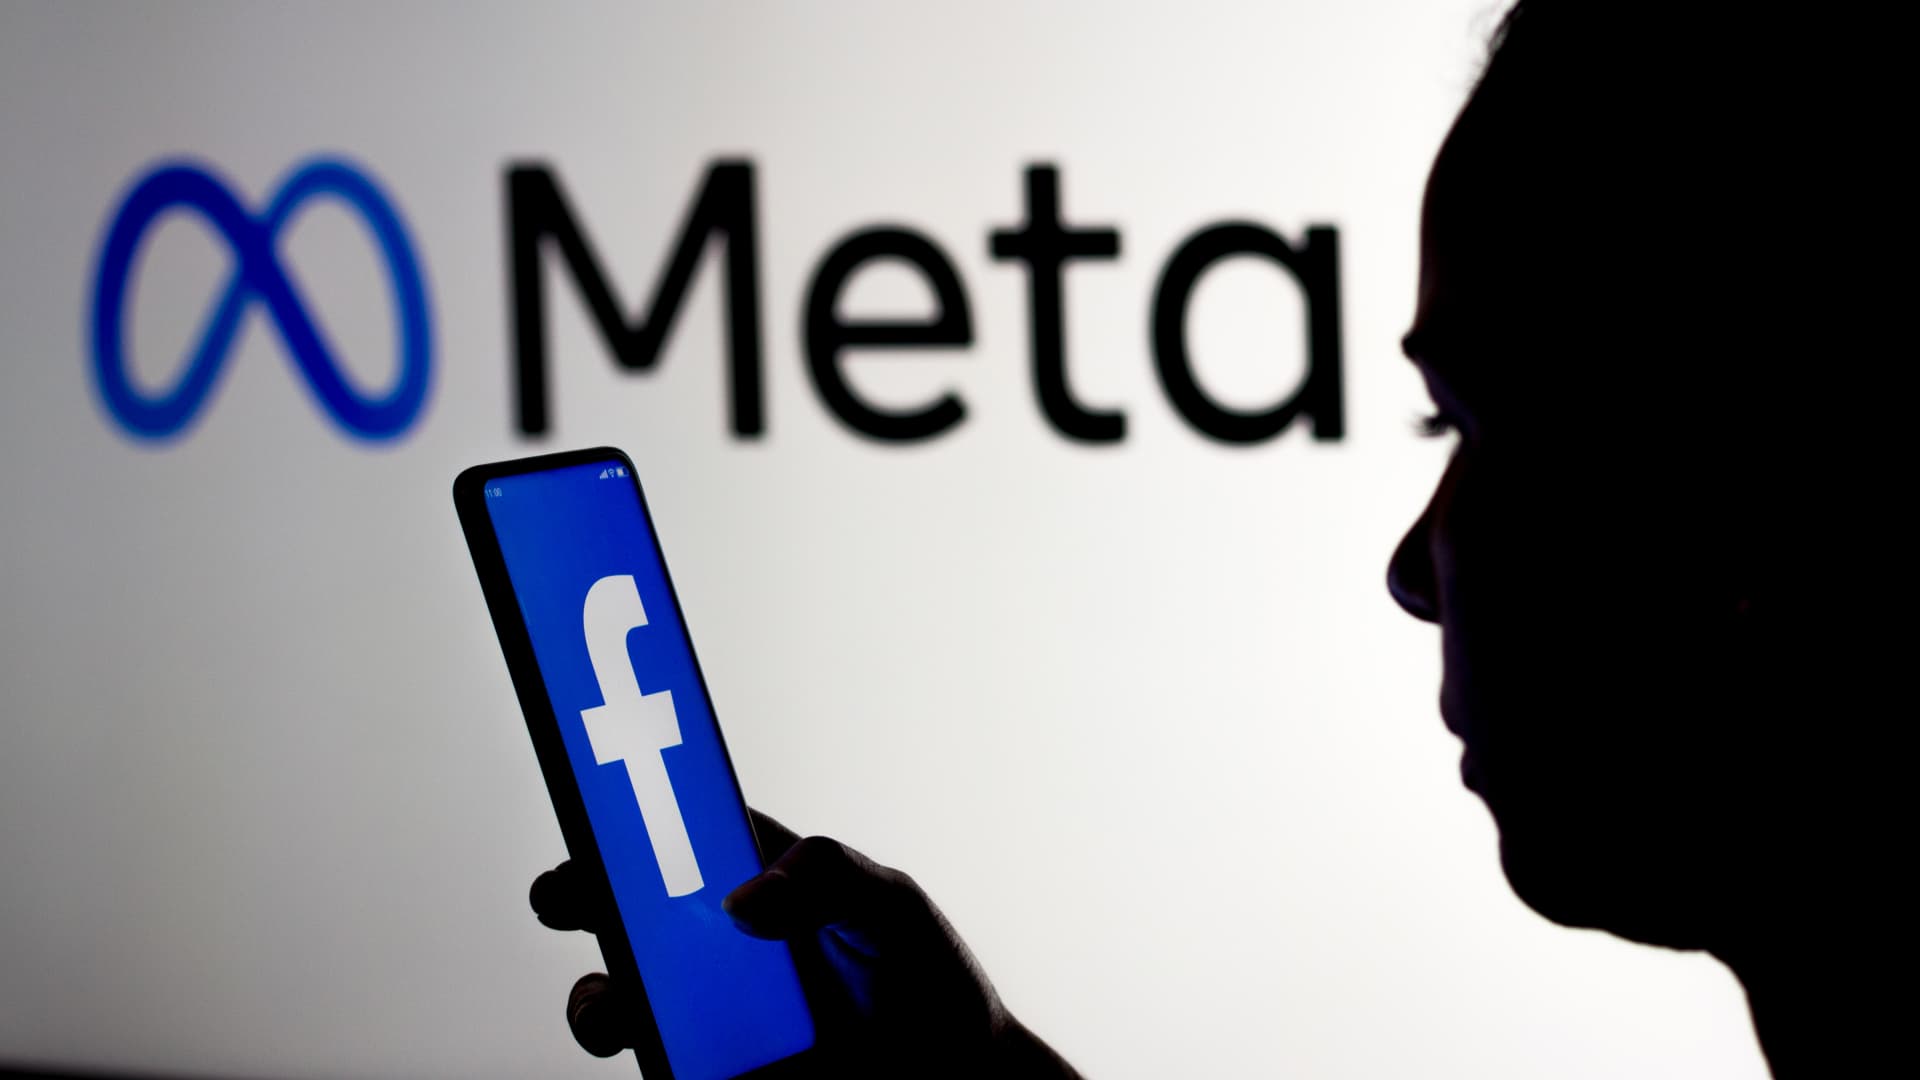 Facebook parent Meta agrees to pay $725 million to settle privacy lawsuit